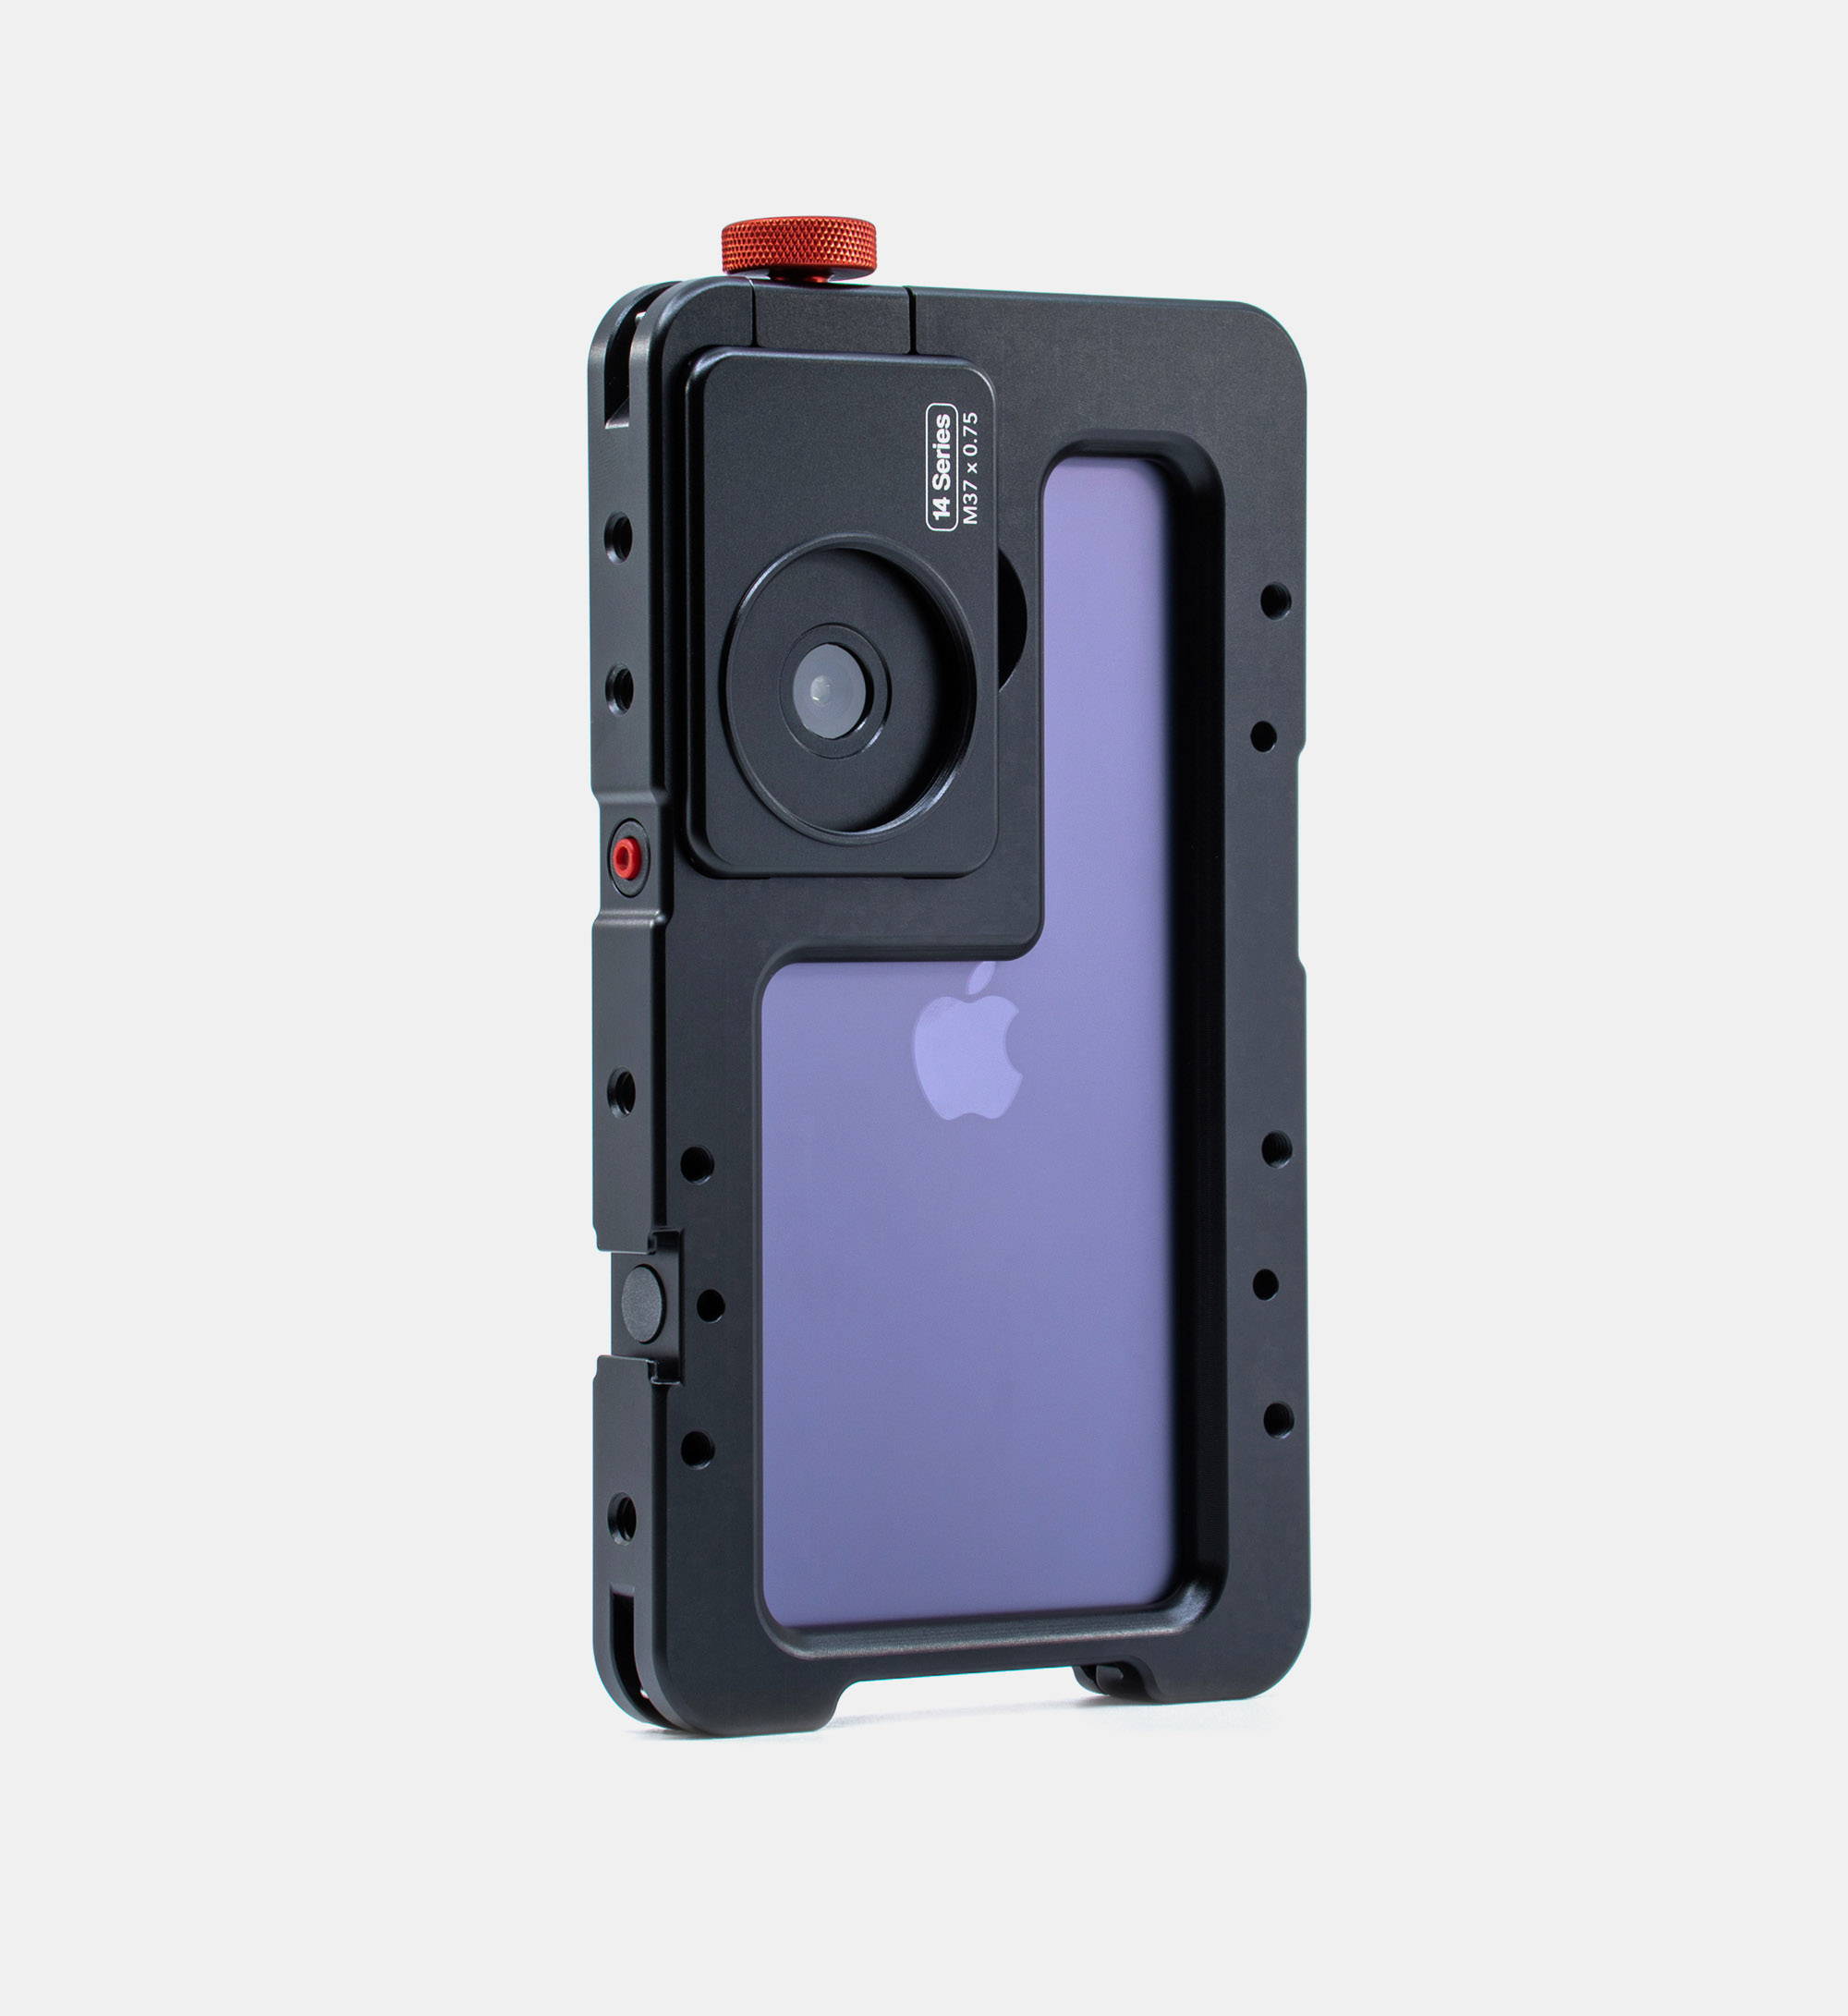 Camera Cage for iPhone - Beastcage